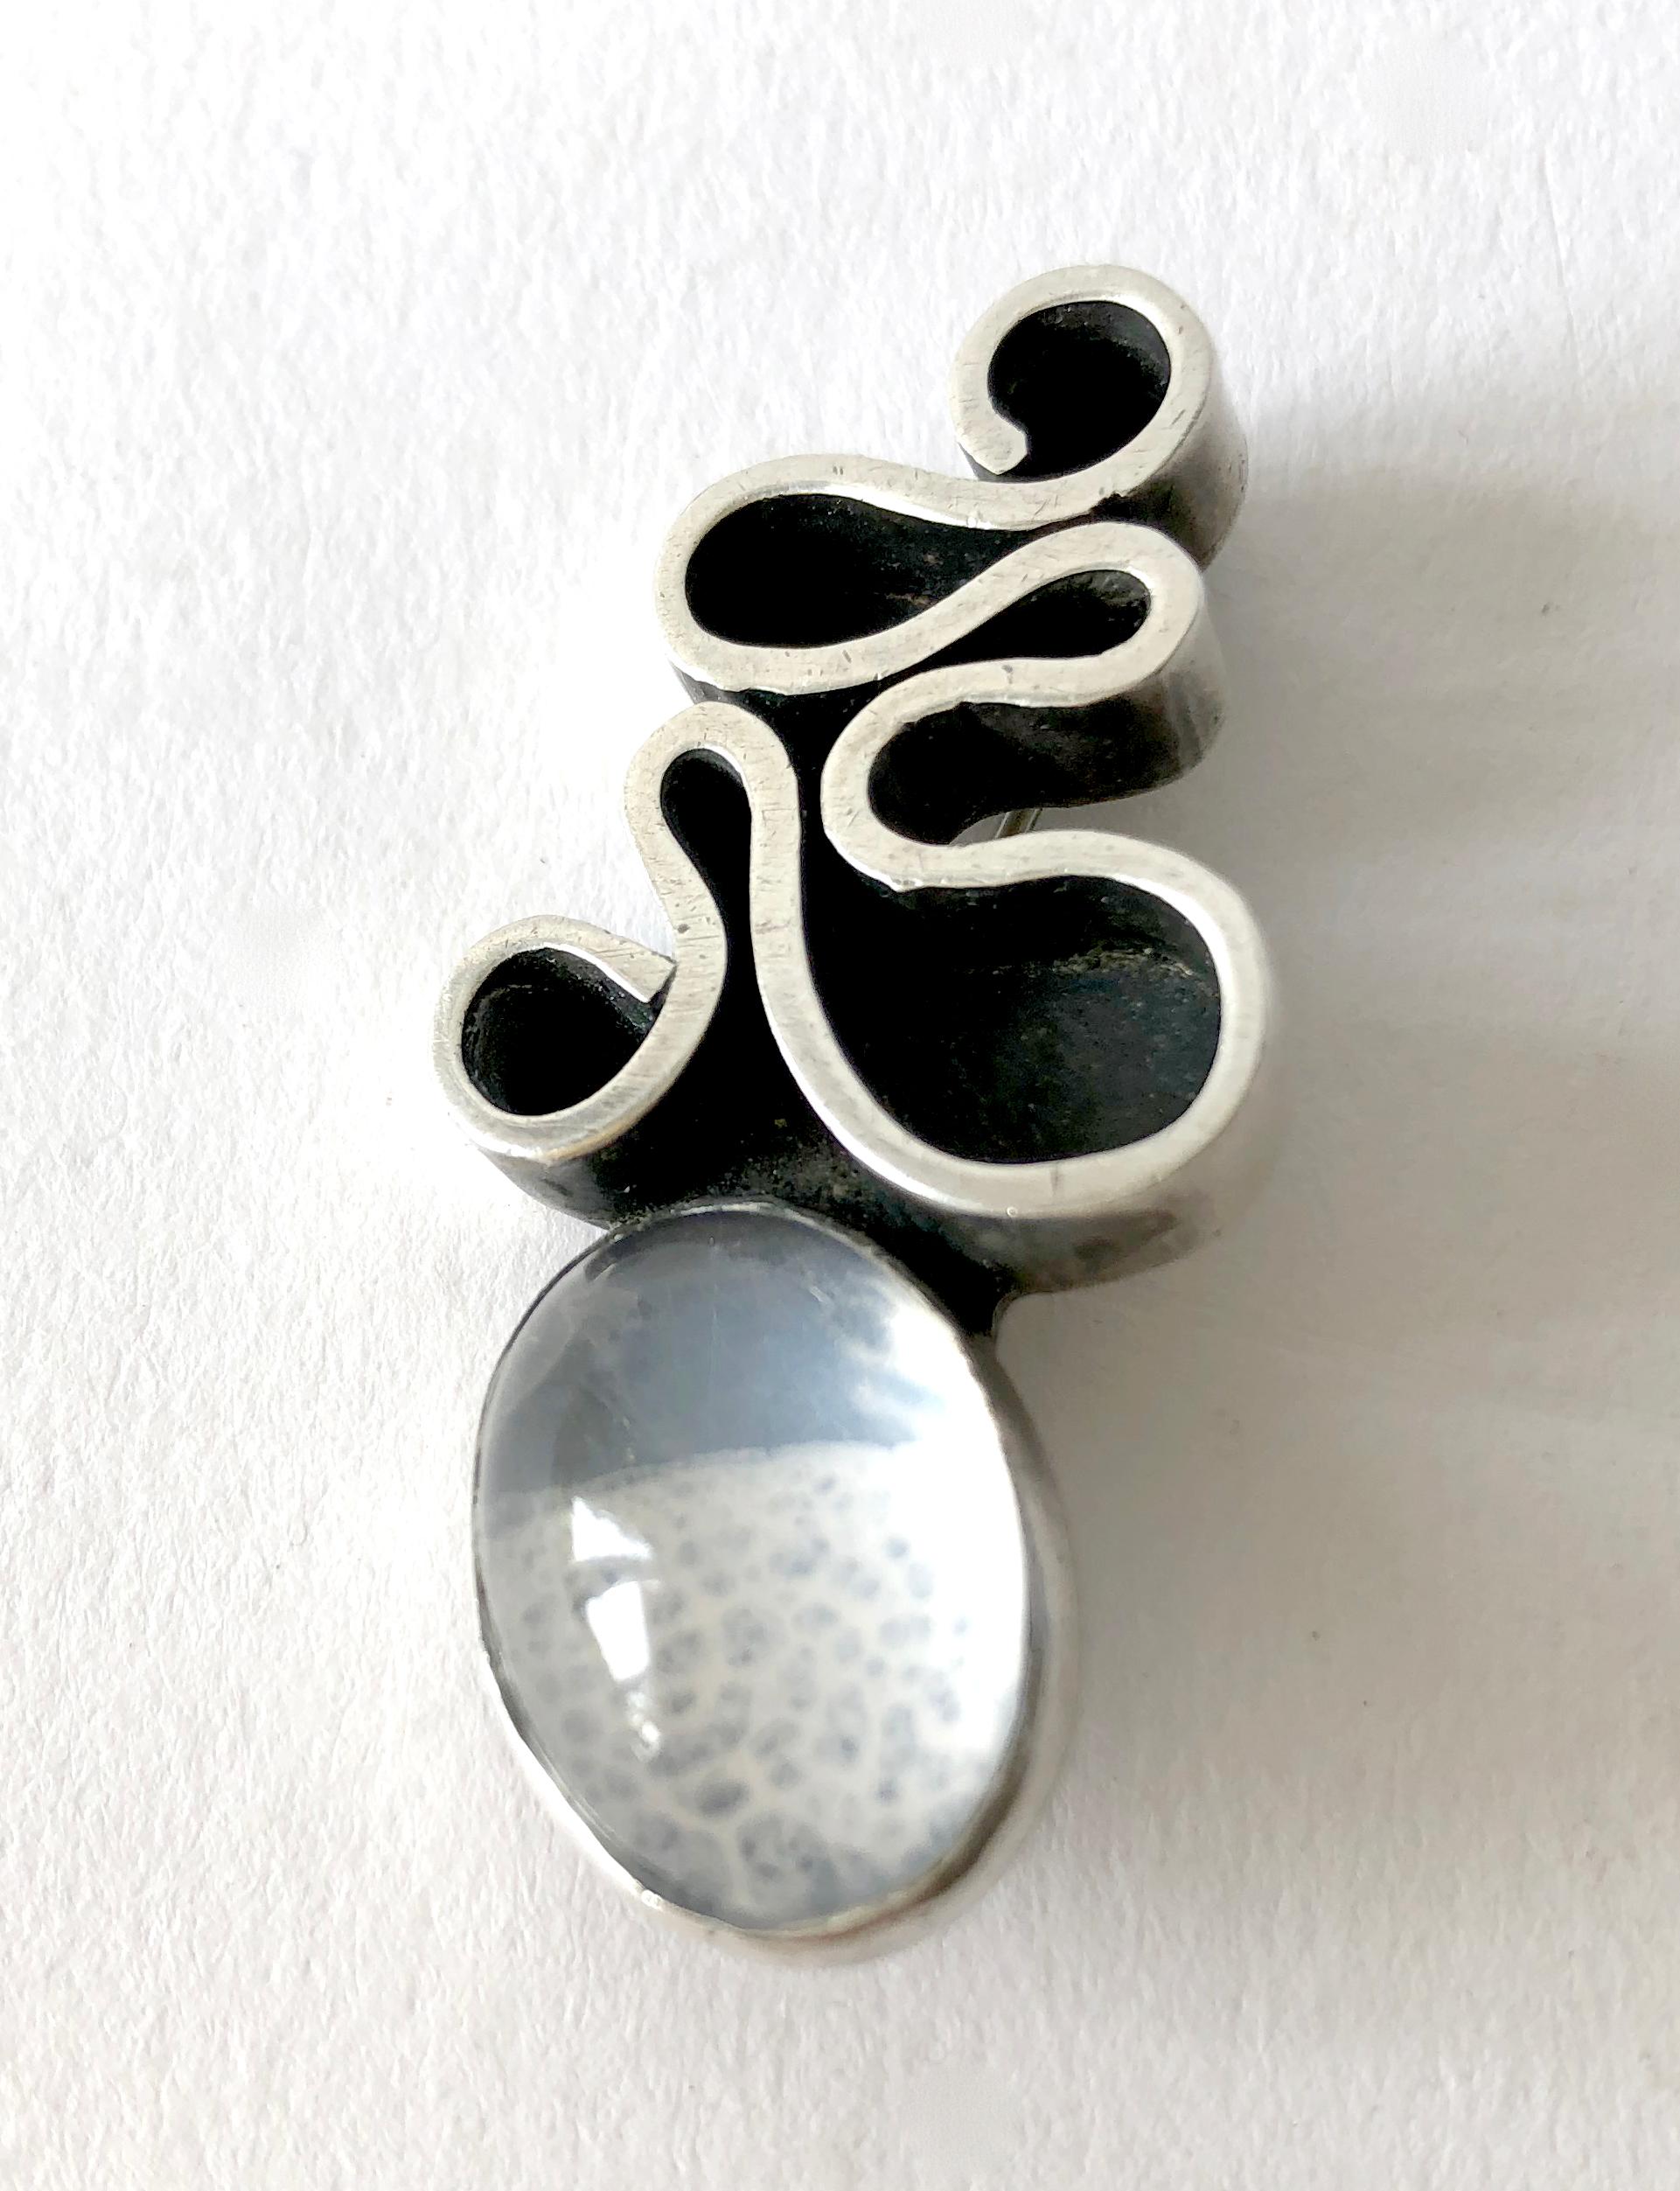 Sterling silver and moonstone squiggle brooch created by Byron Wilson of San Francisco, California. Brooch measures 1 3/4